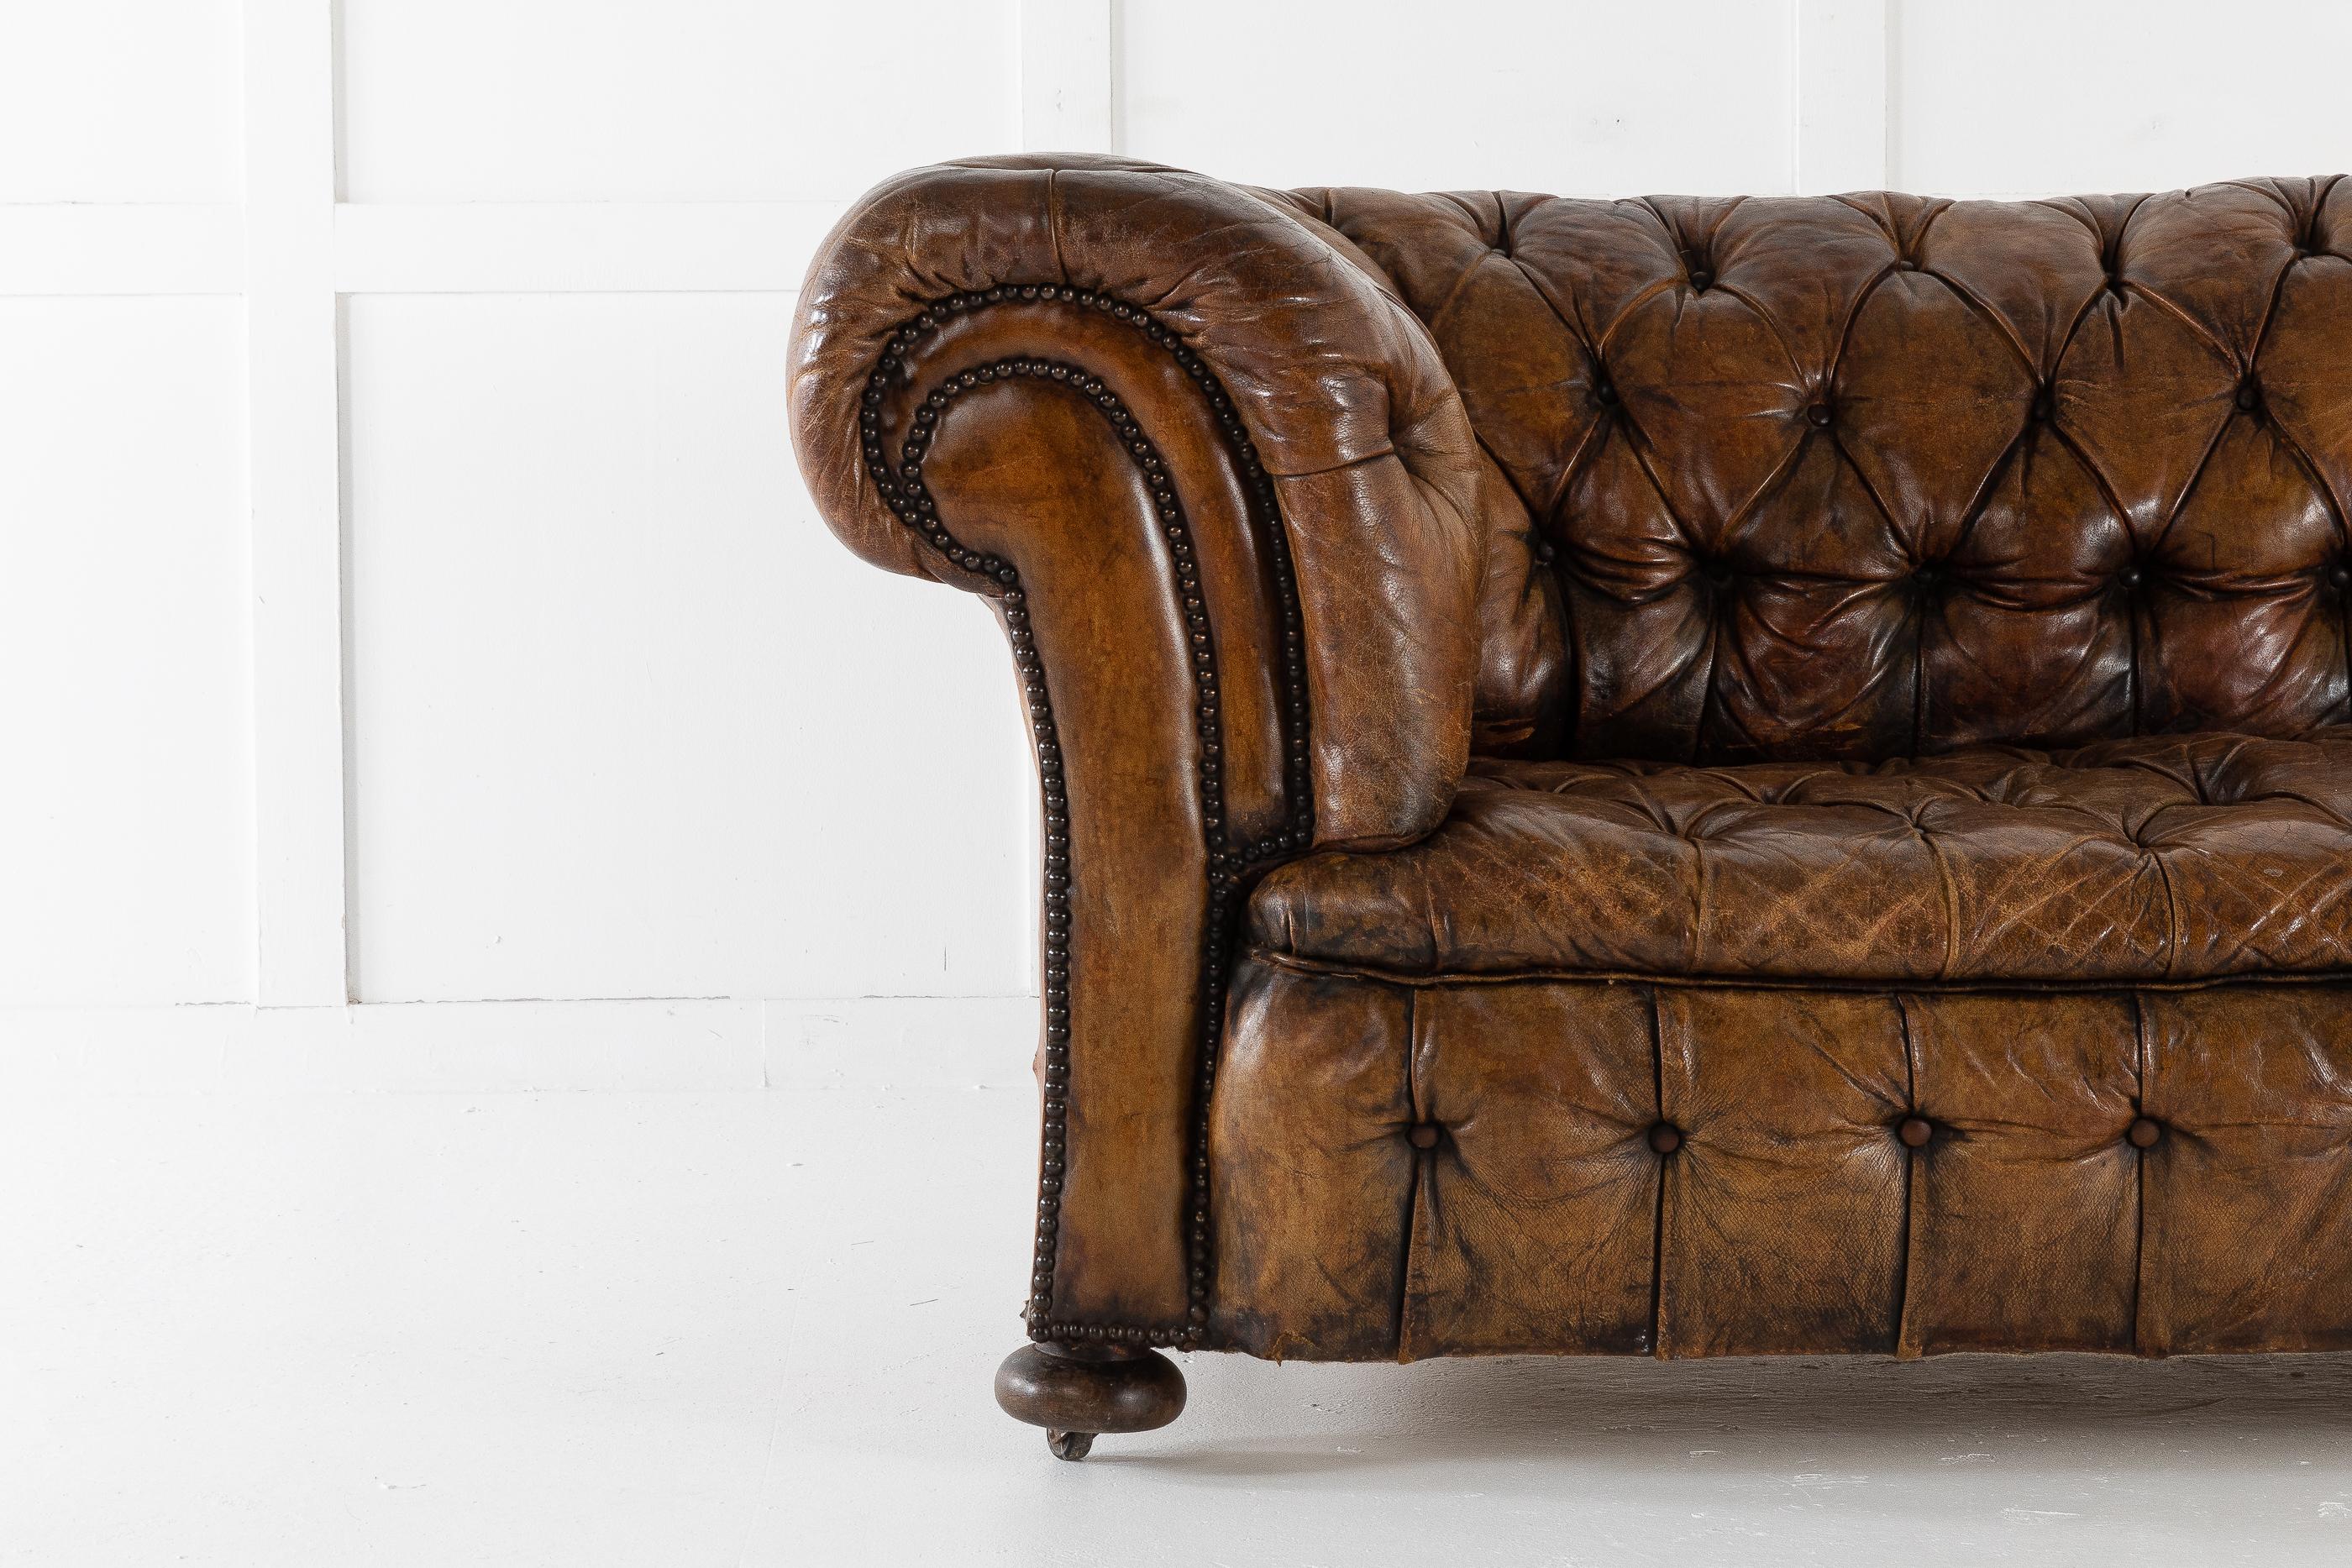 Excellent quality, timeless, deep buttoned leather chesterfield retaining its original faded patinated leather. Standing on round wood bun feet. Having brass nailhead trim and fully buttoned base.

Originally in our office for years, very